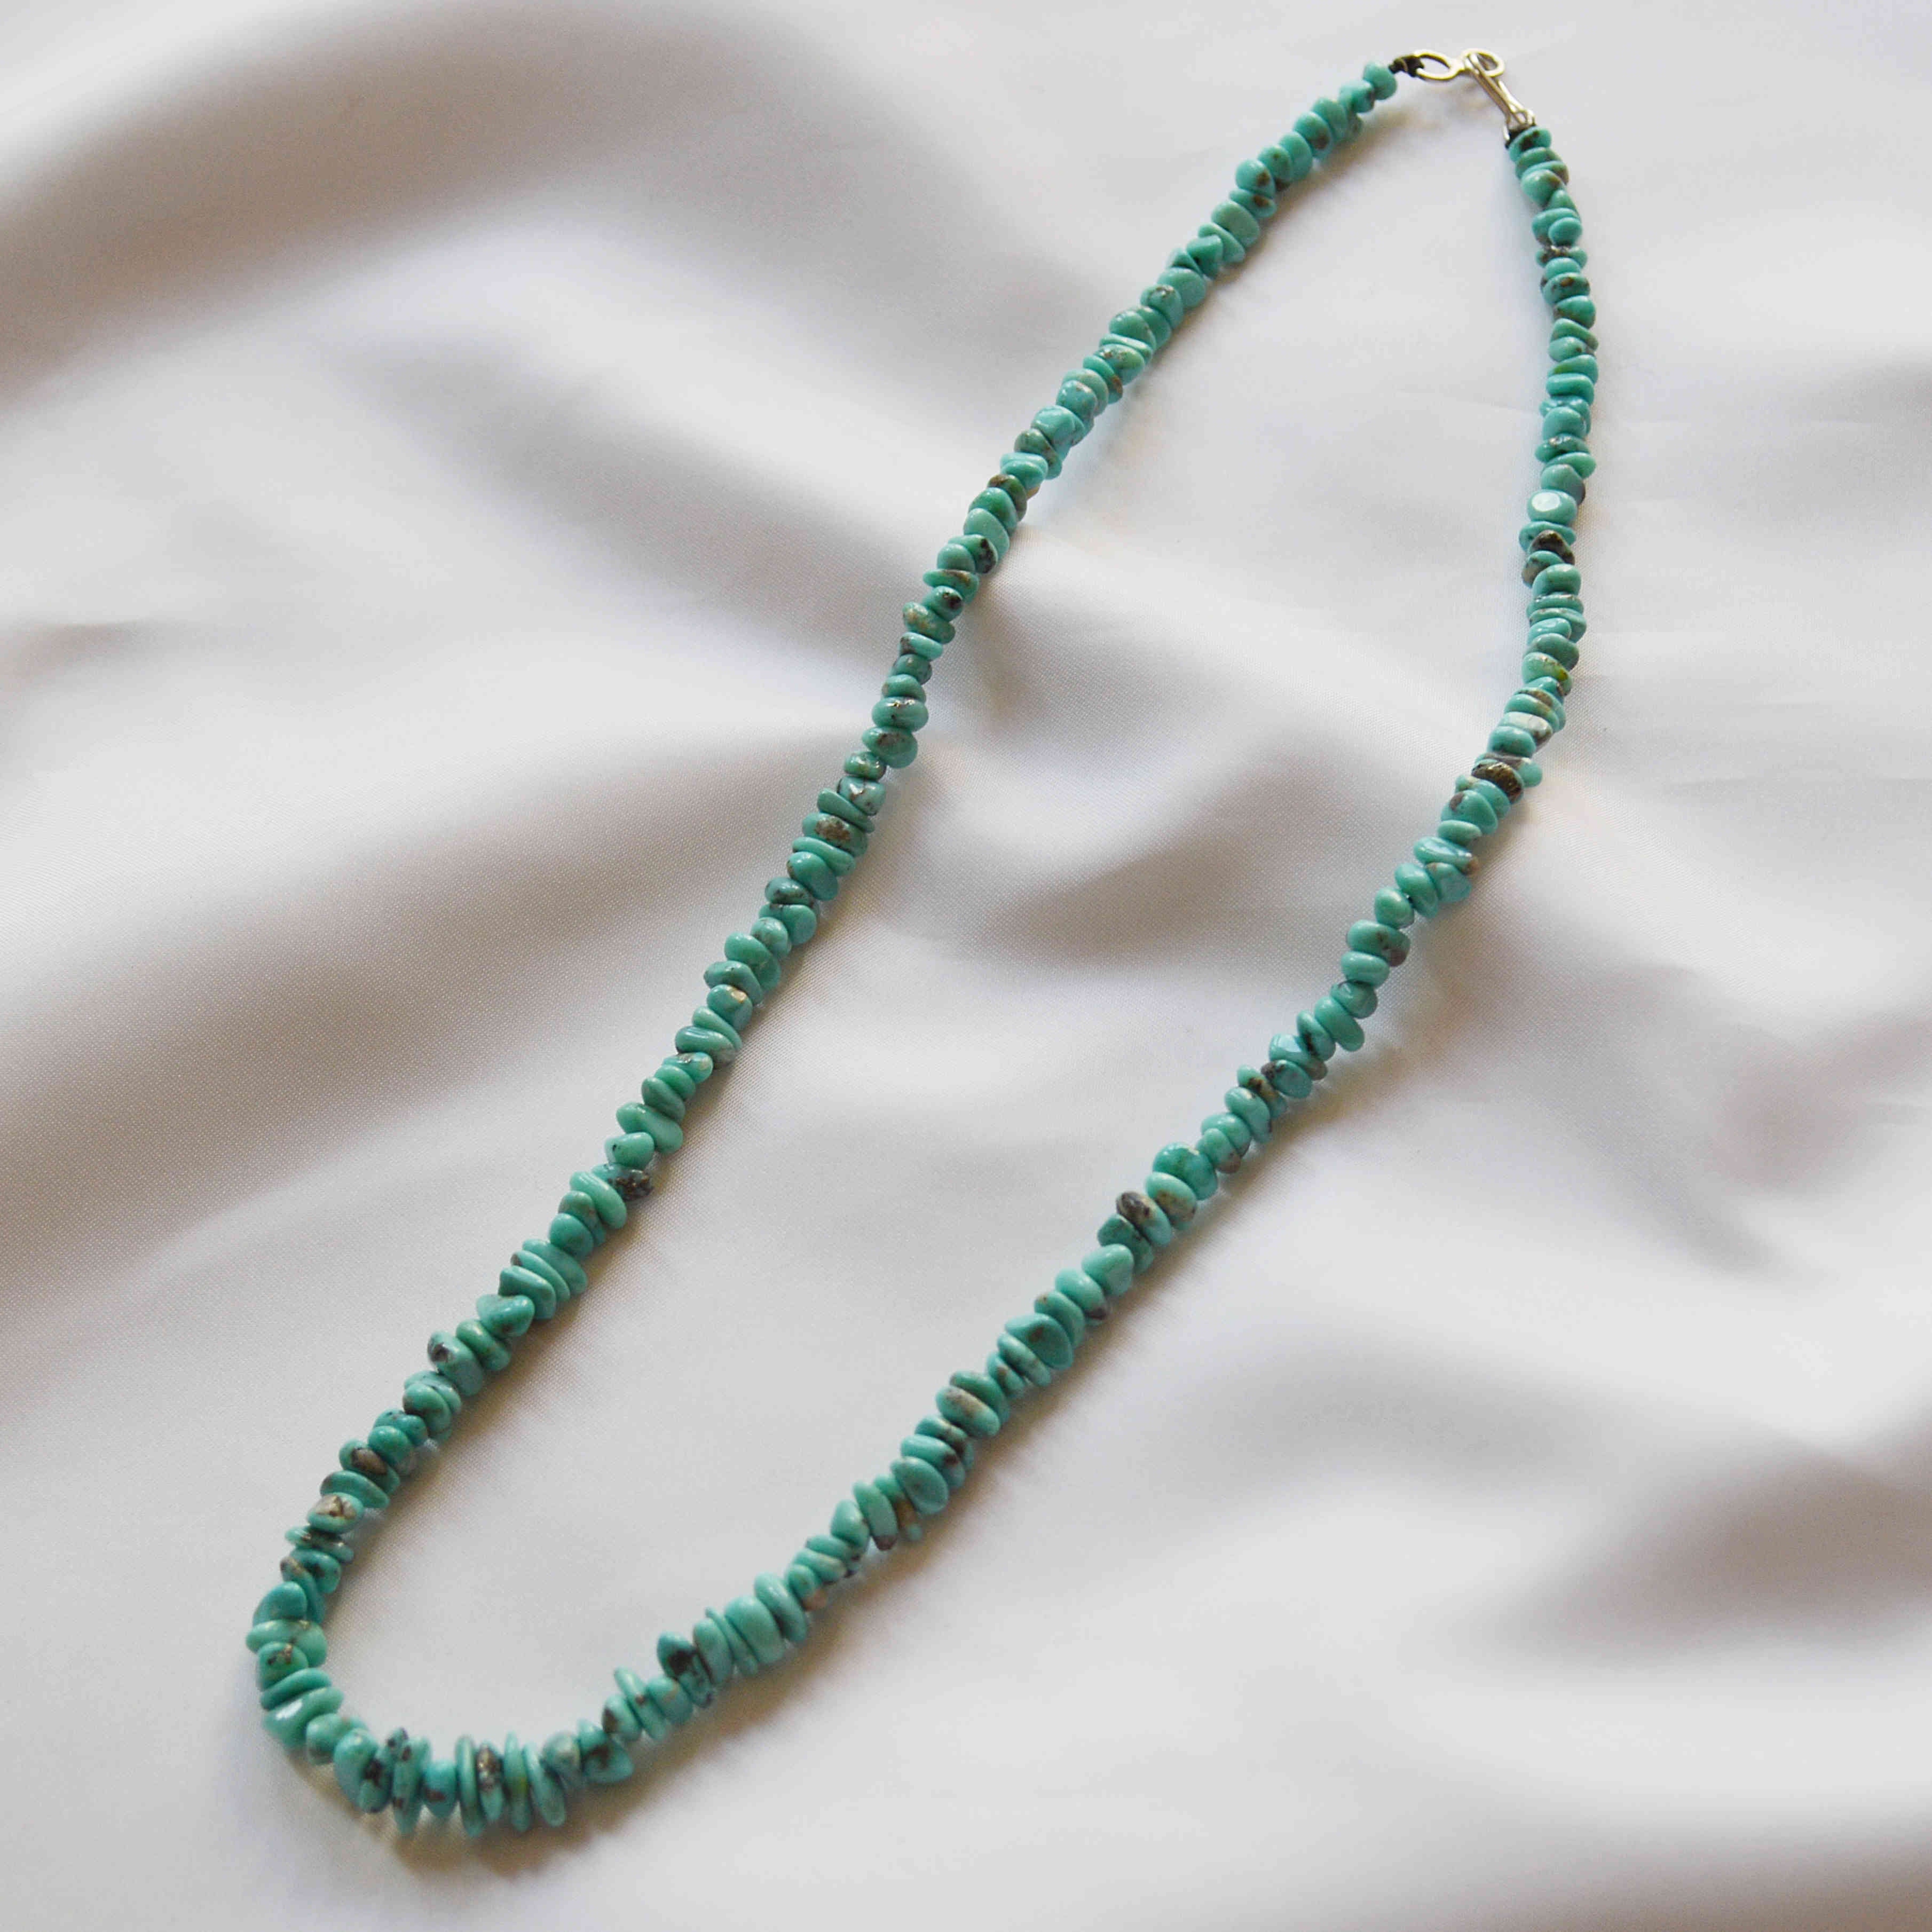 Indian jewelry インディアンジュエリー / Navajo Nugget Necklace ナヴァホナゲットネックレス (Sonoran Gold Turquoise ソロナンゴールド)